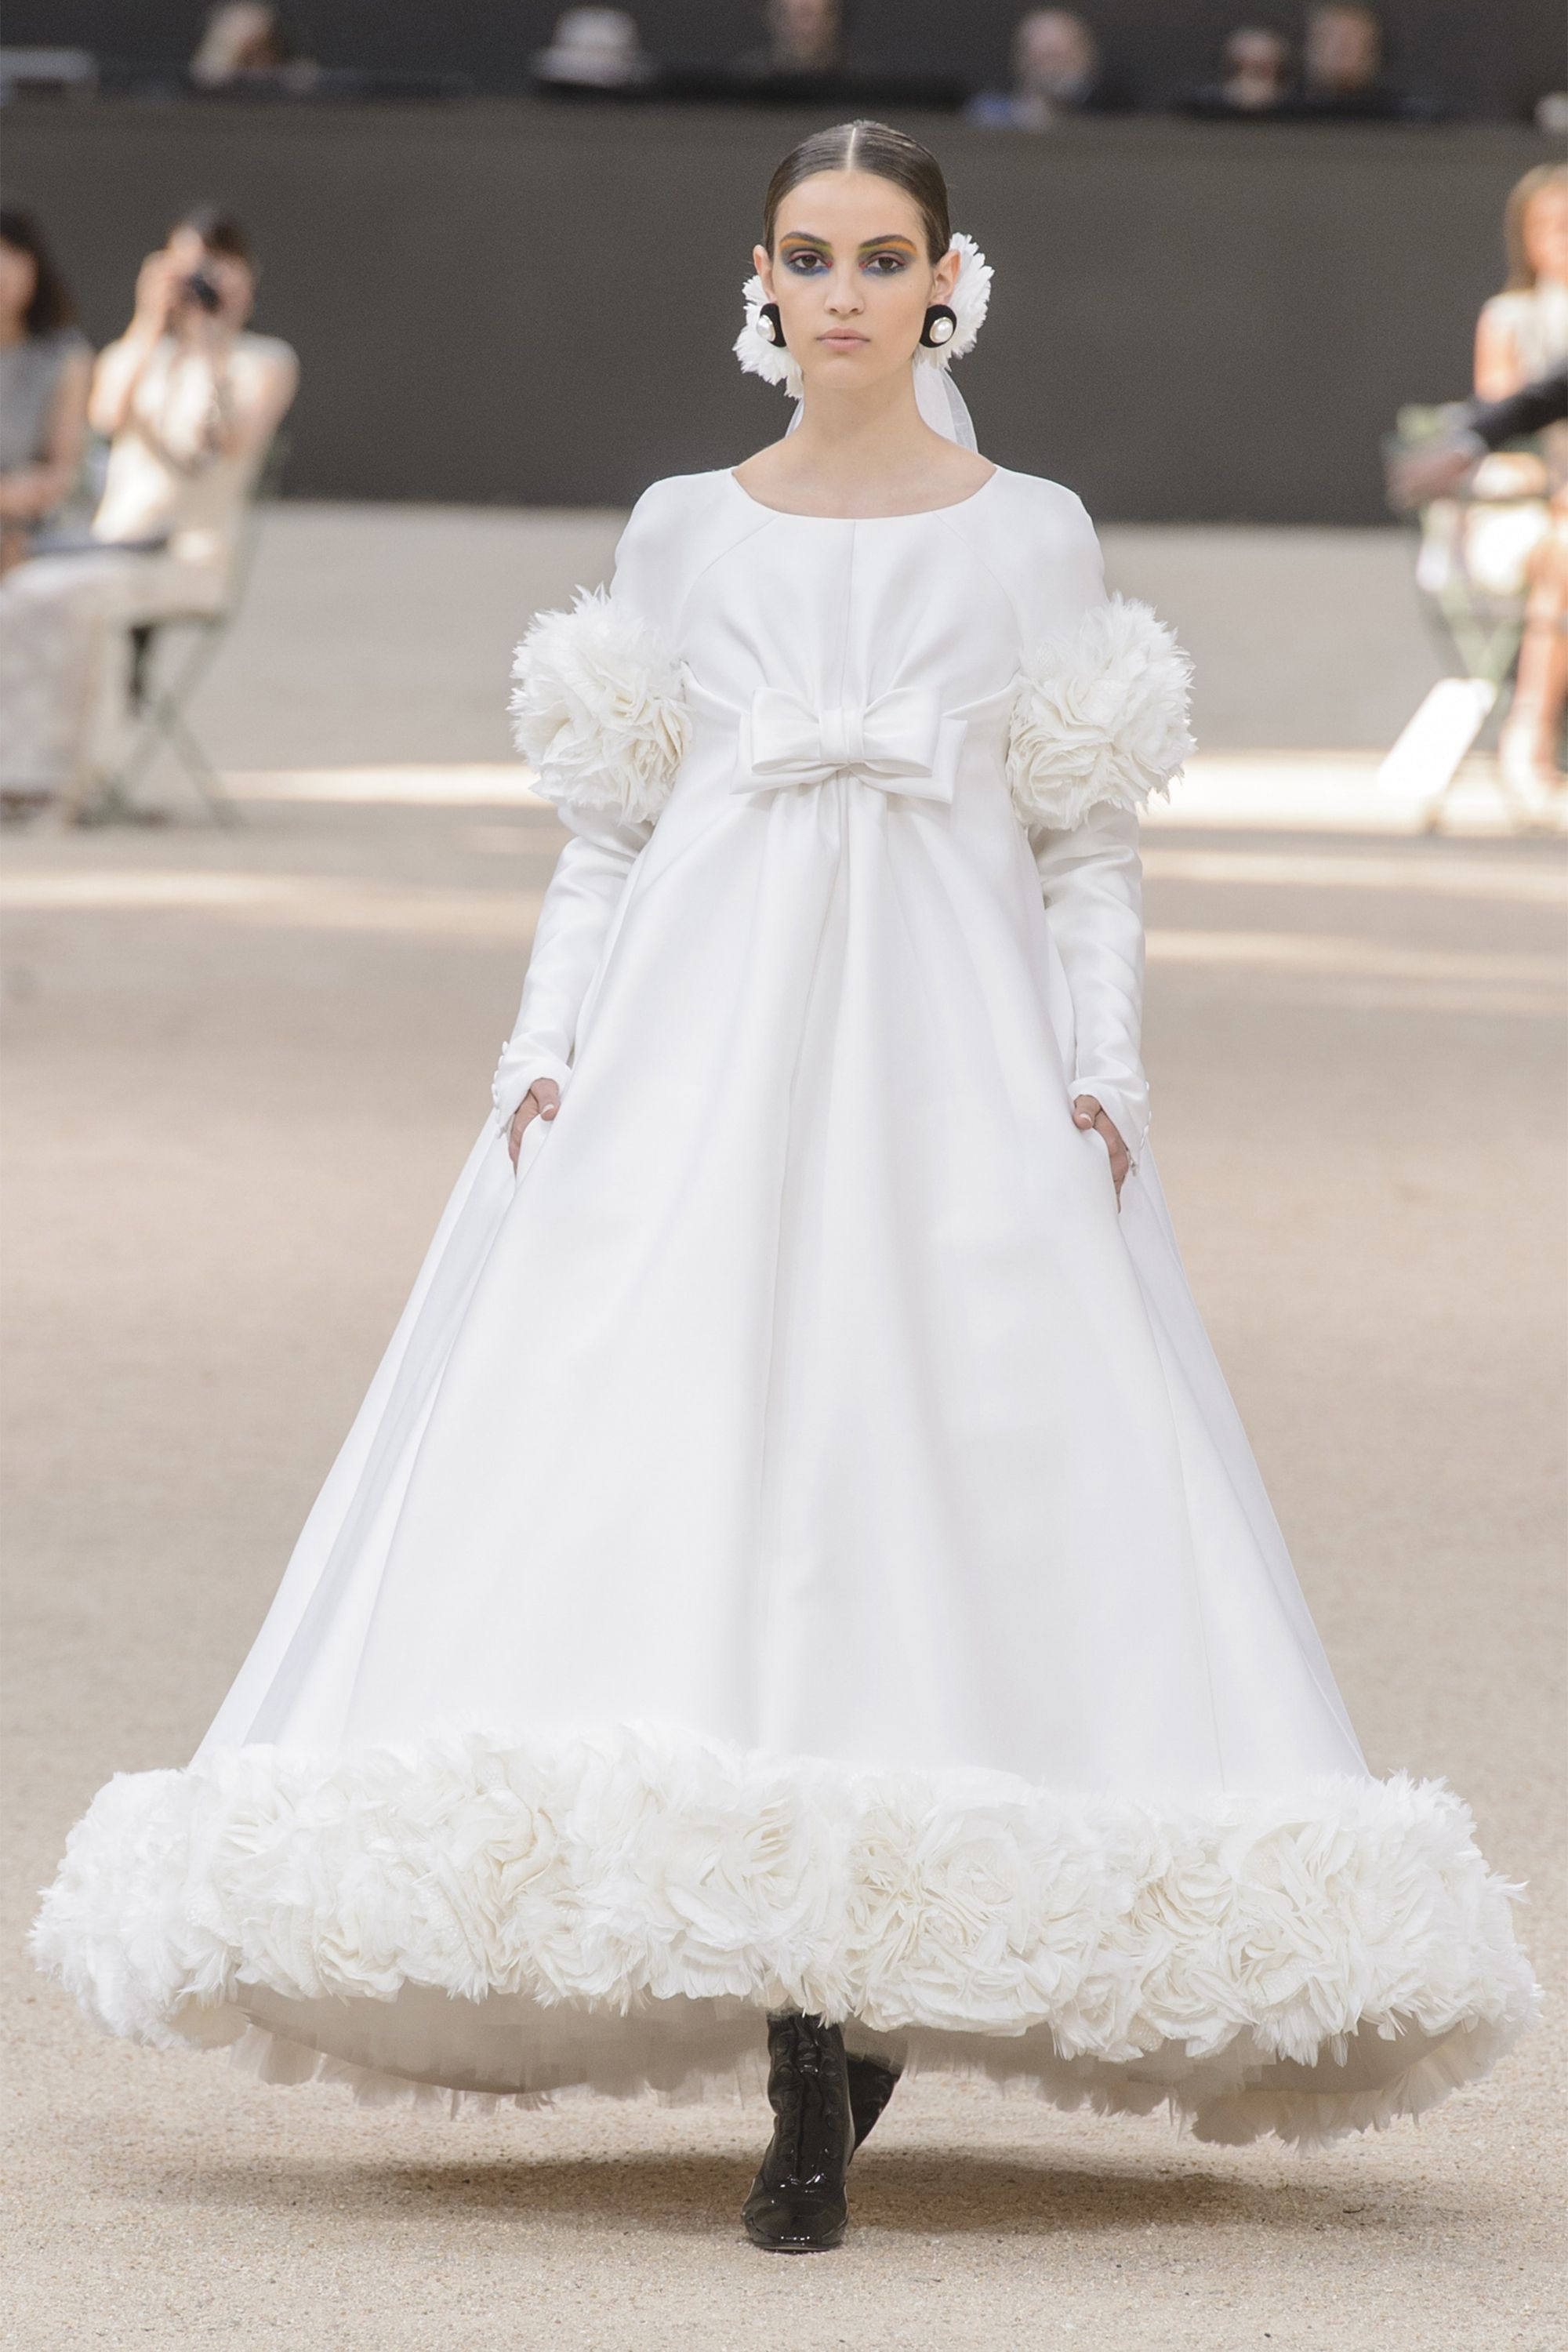 The Best Wedding Dresses From Paris Haute Couture Fashion Week ...